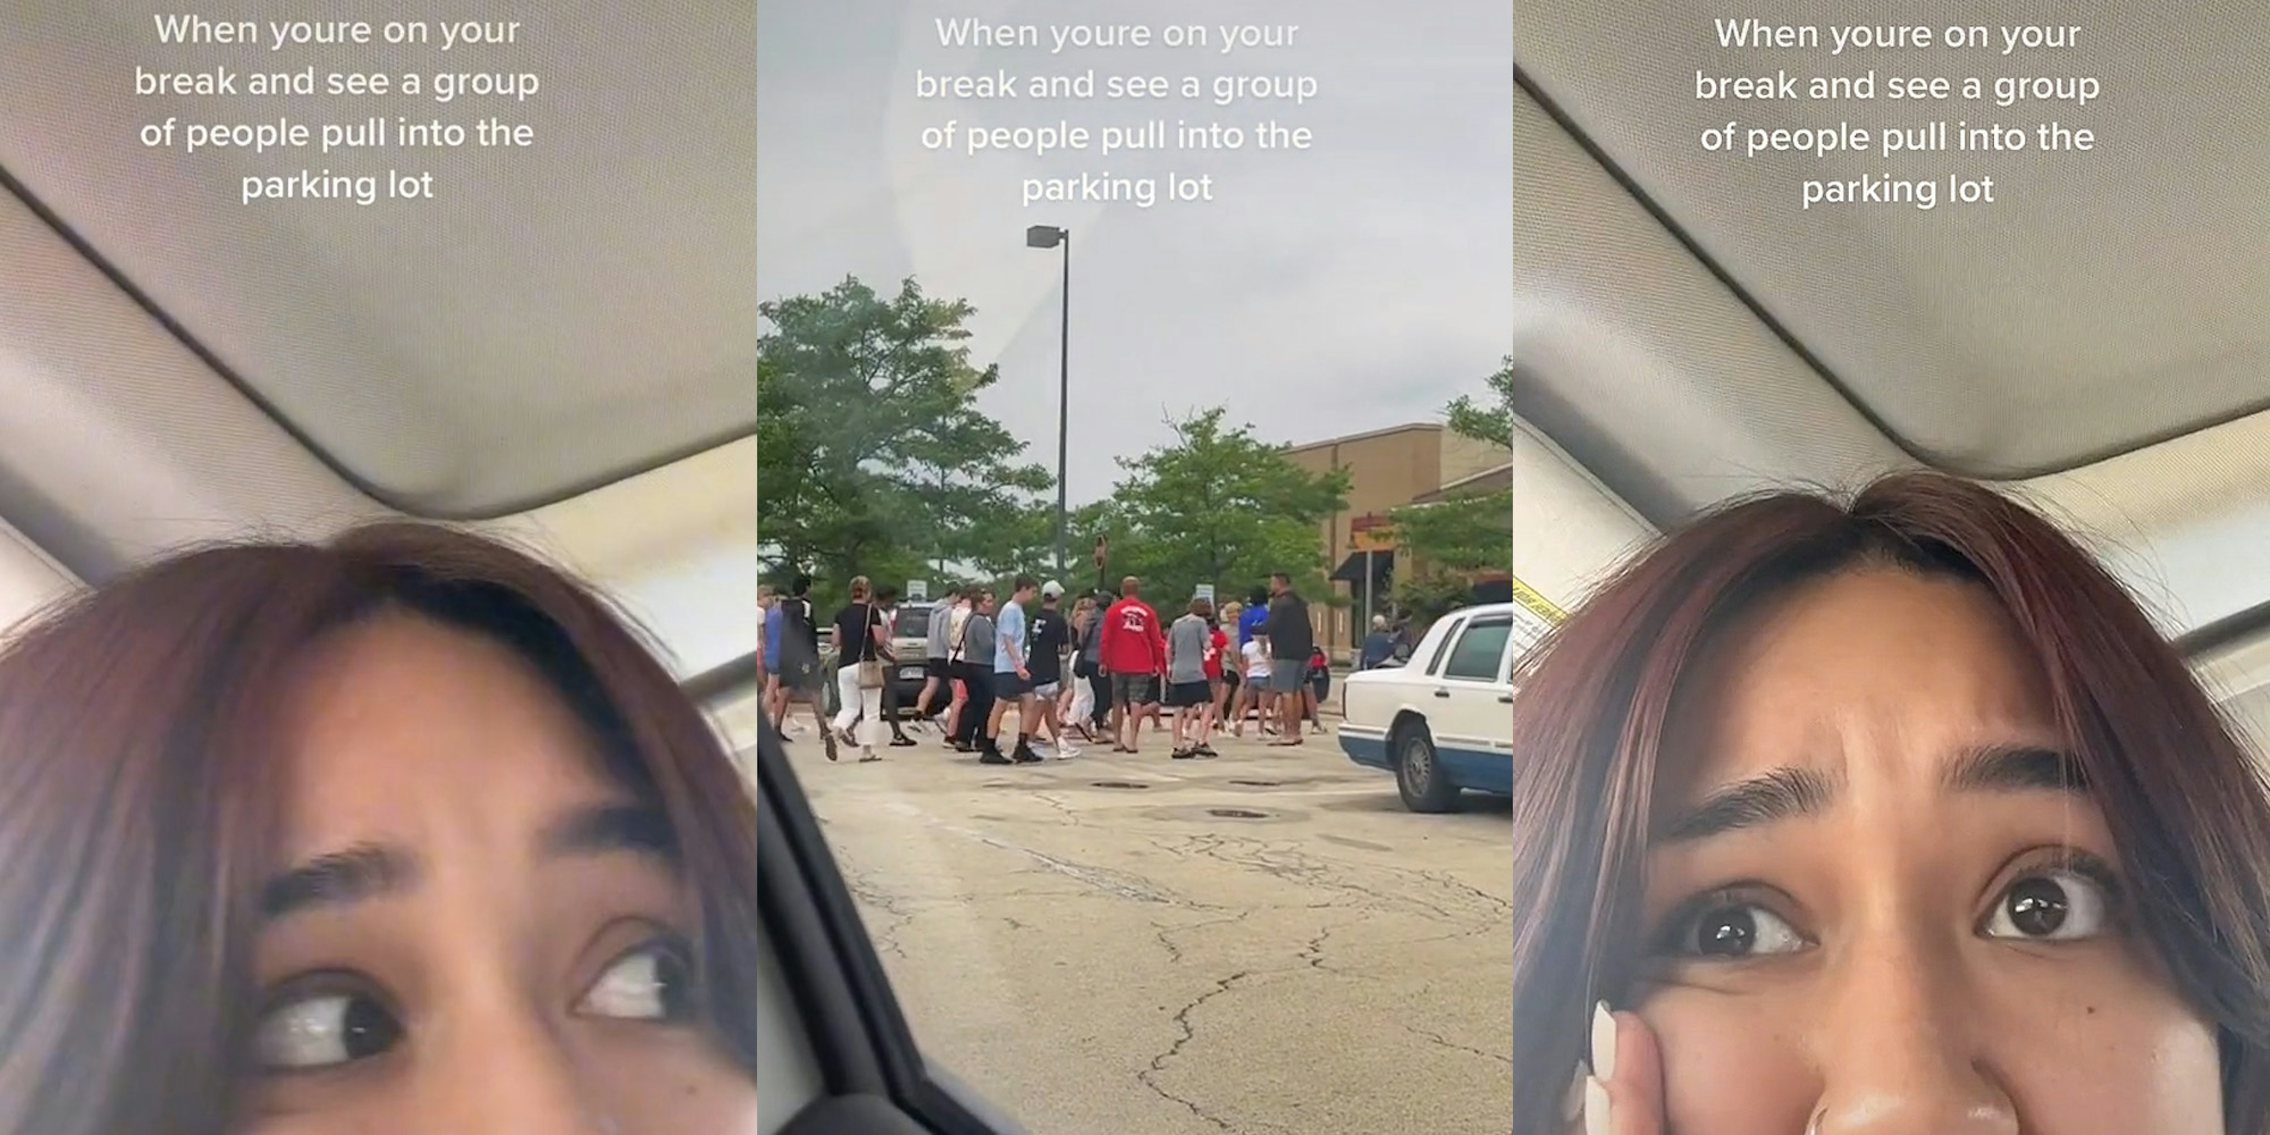 woman in car looking right caption 'When you're on your break and see a group of people pull into the parking lot' (l) group of people walking in parking lot (c) woman in car scared expression caption 'When you're on your break and see a group of people pull into the parking lot' (r)